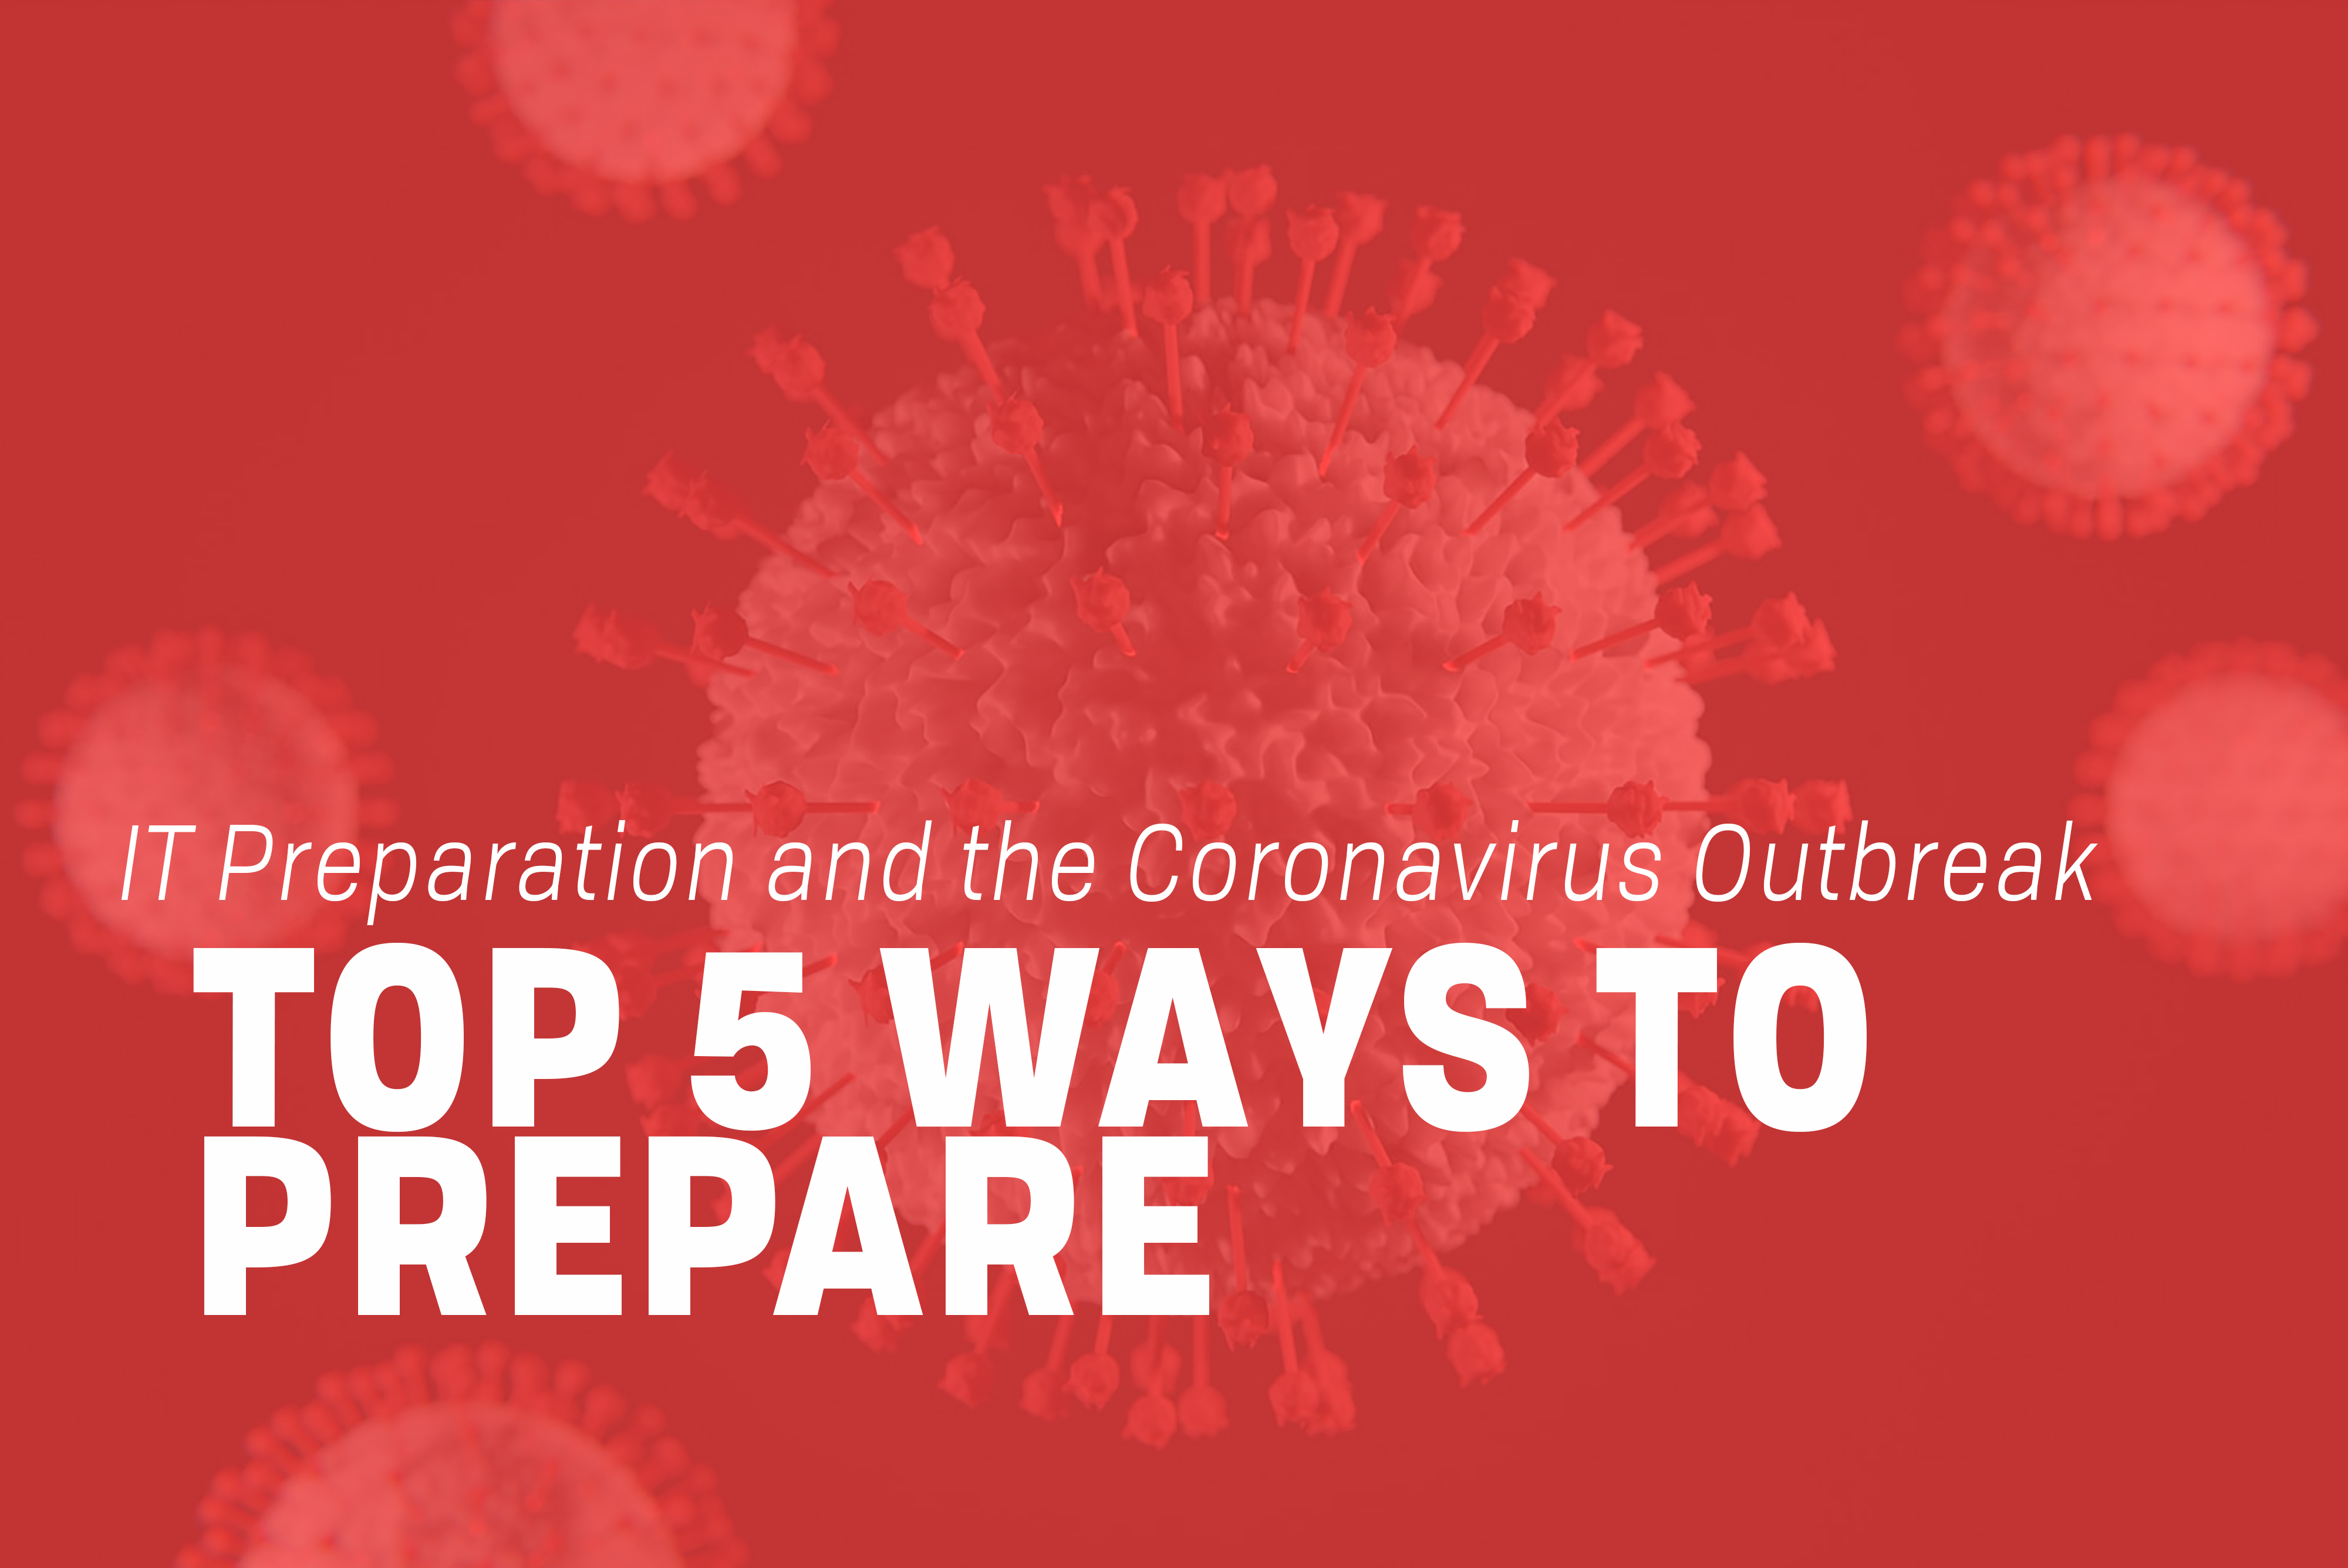 You are currently viewing Top 5 Ways to Focus on IT Preparation Amidst the Coronavirus Outbreak (Plus a Bonus Item)